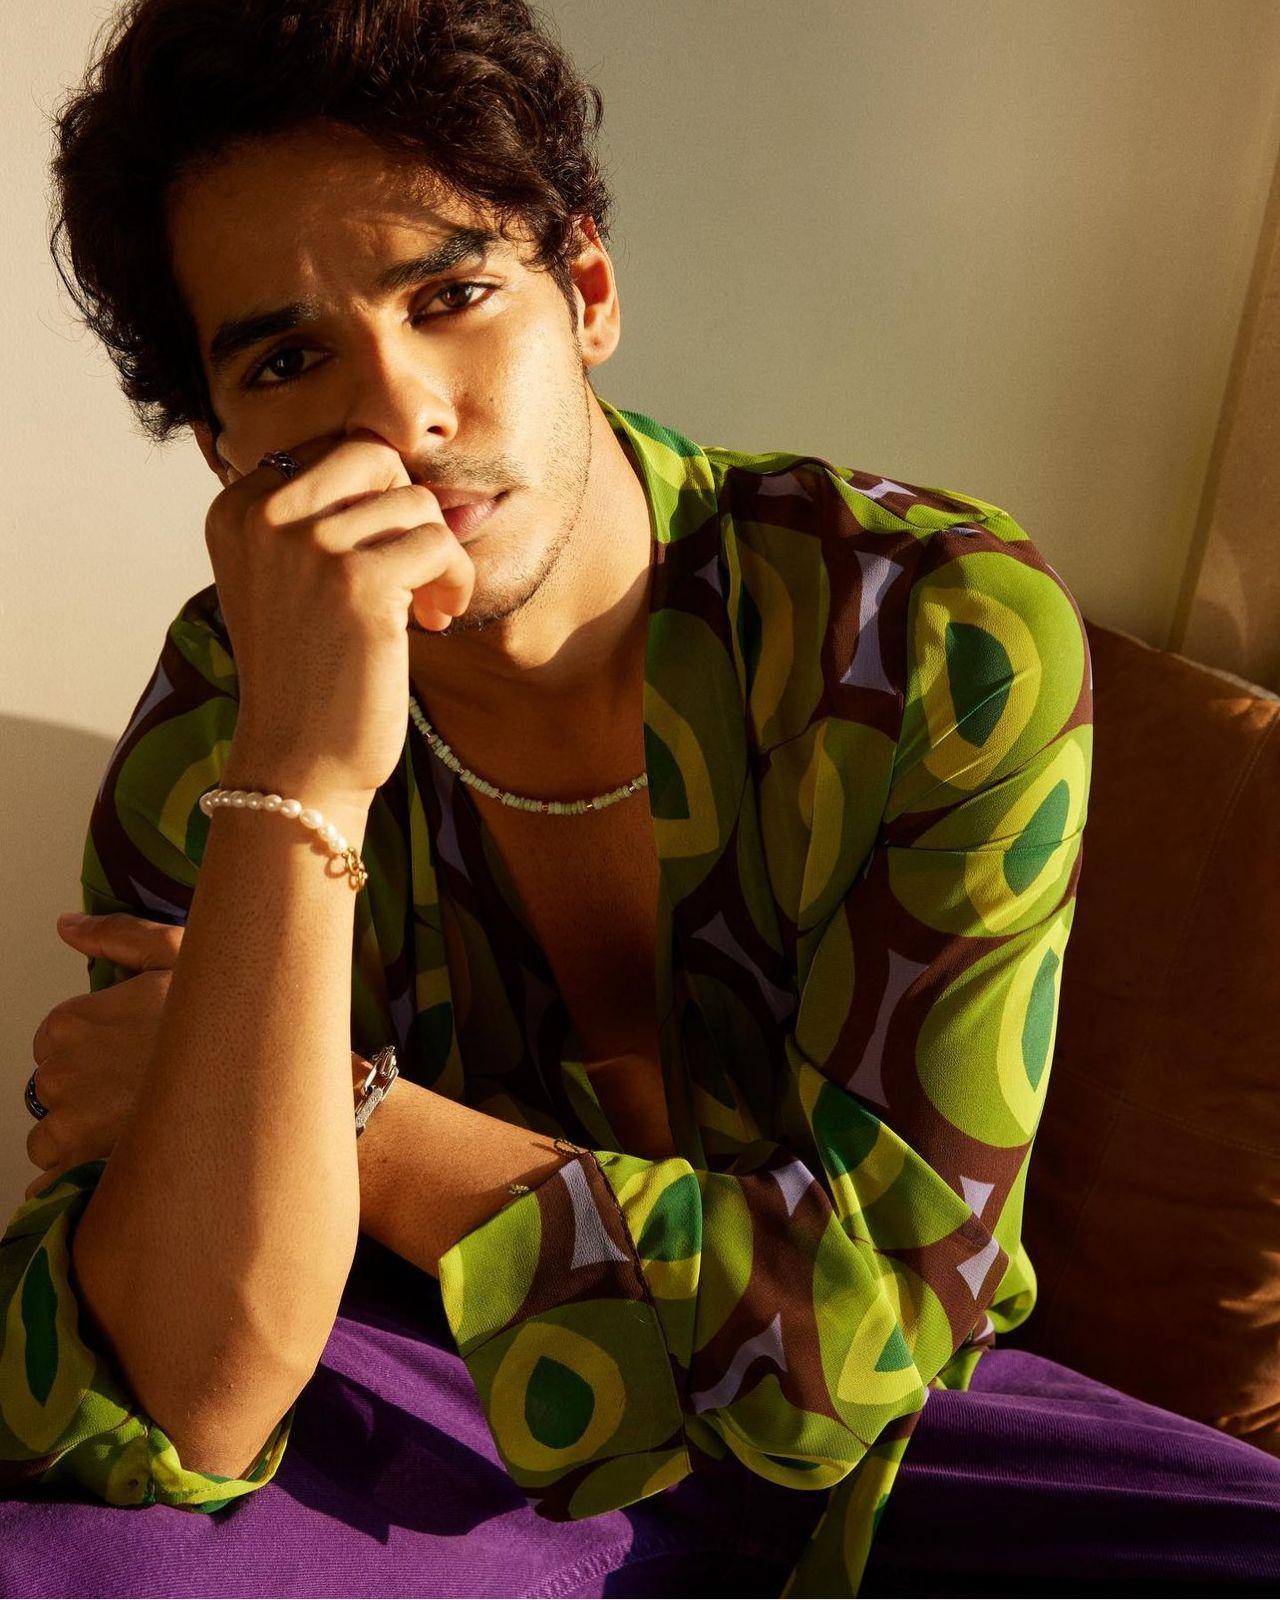 Following in the footsteps of his brother, Ishaan Khatter embraces his individuality and showcases a fashion sense that is both quirky and captivating. Whether it's his patterned shirts, loose shirts, bucket hats, or unique pairings like cargo pants, Ishaan's fashion choices always make a statement. He also isn't afraid to incorporate jewellery into his looks, adding an extra touch of flair.